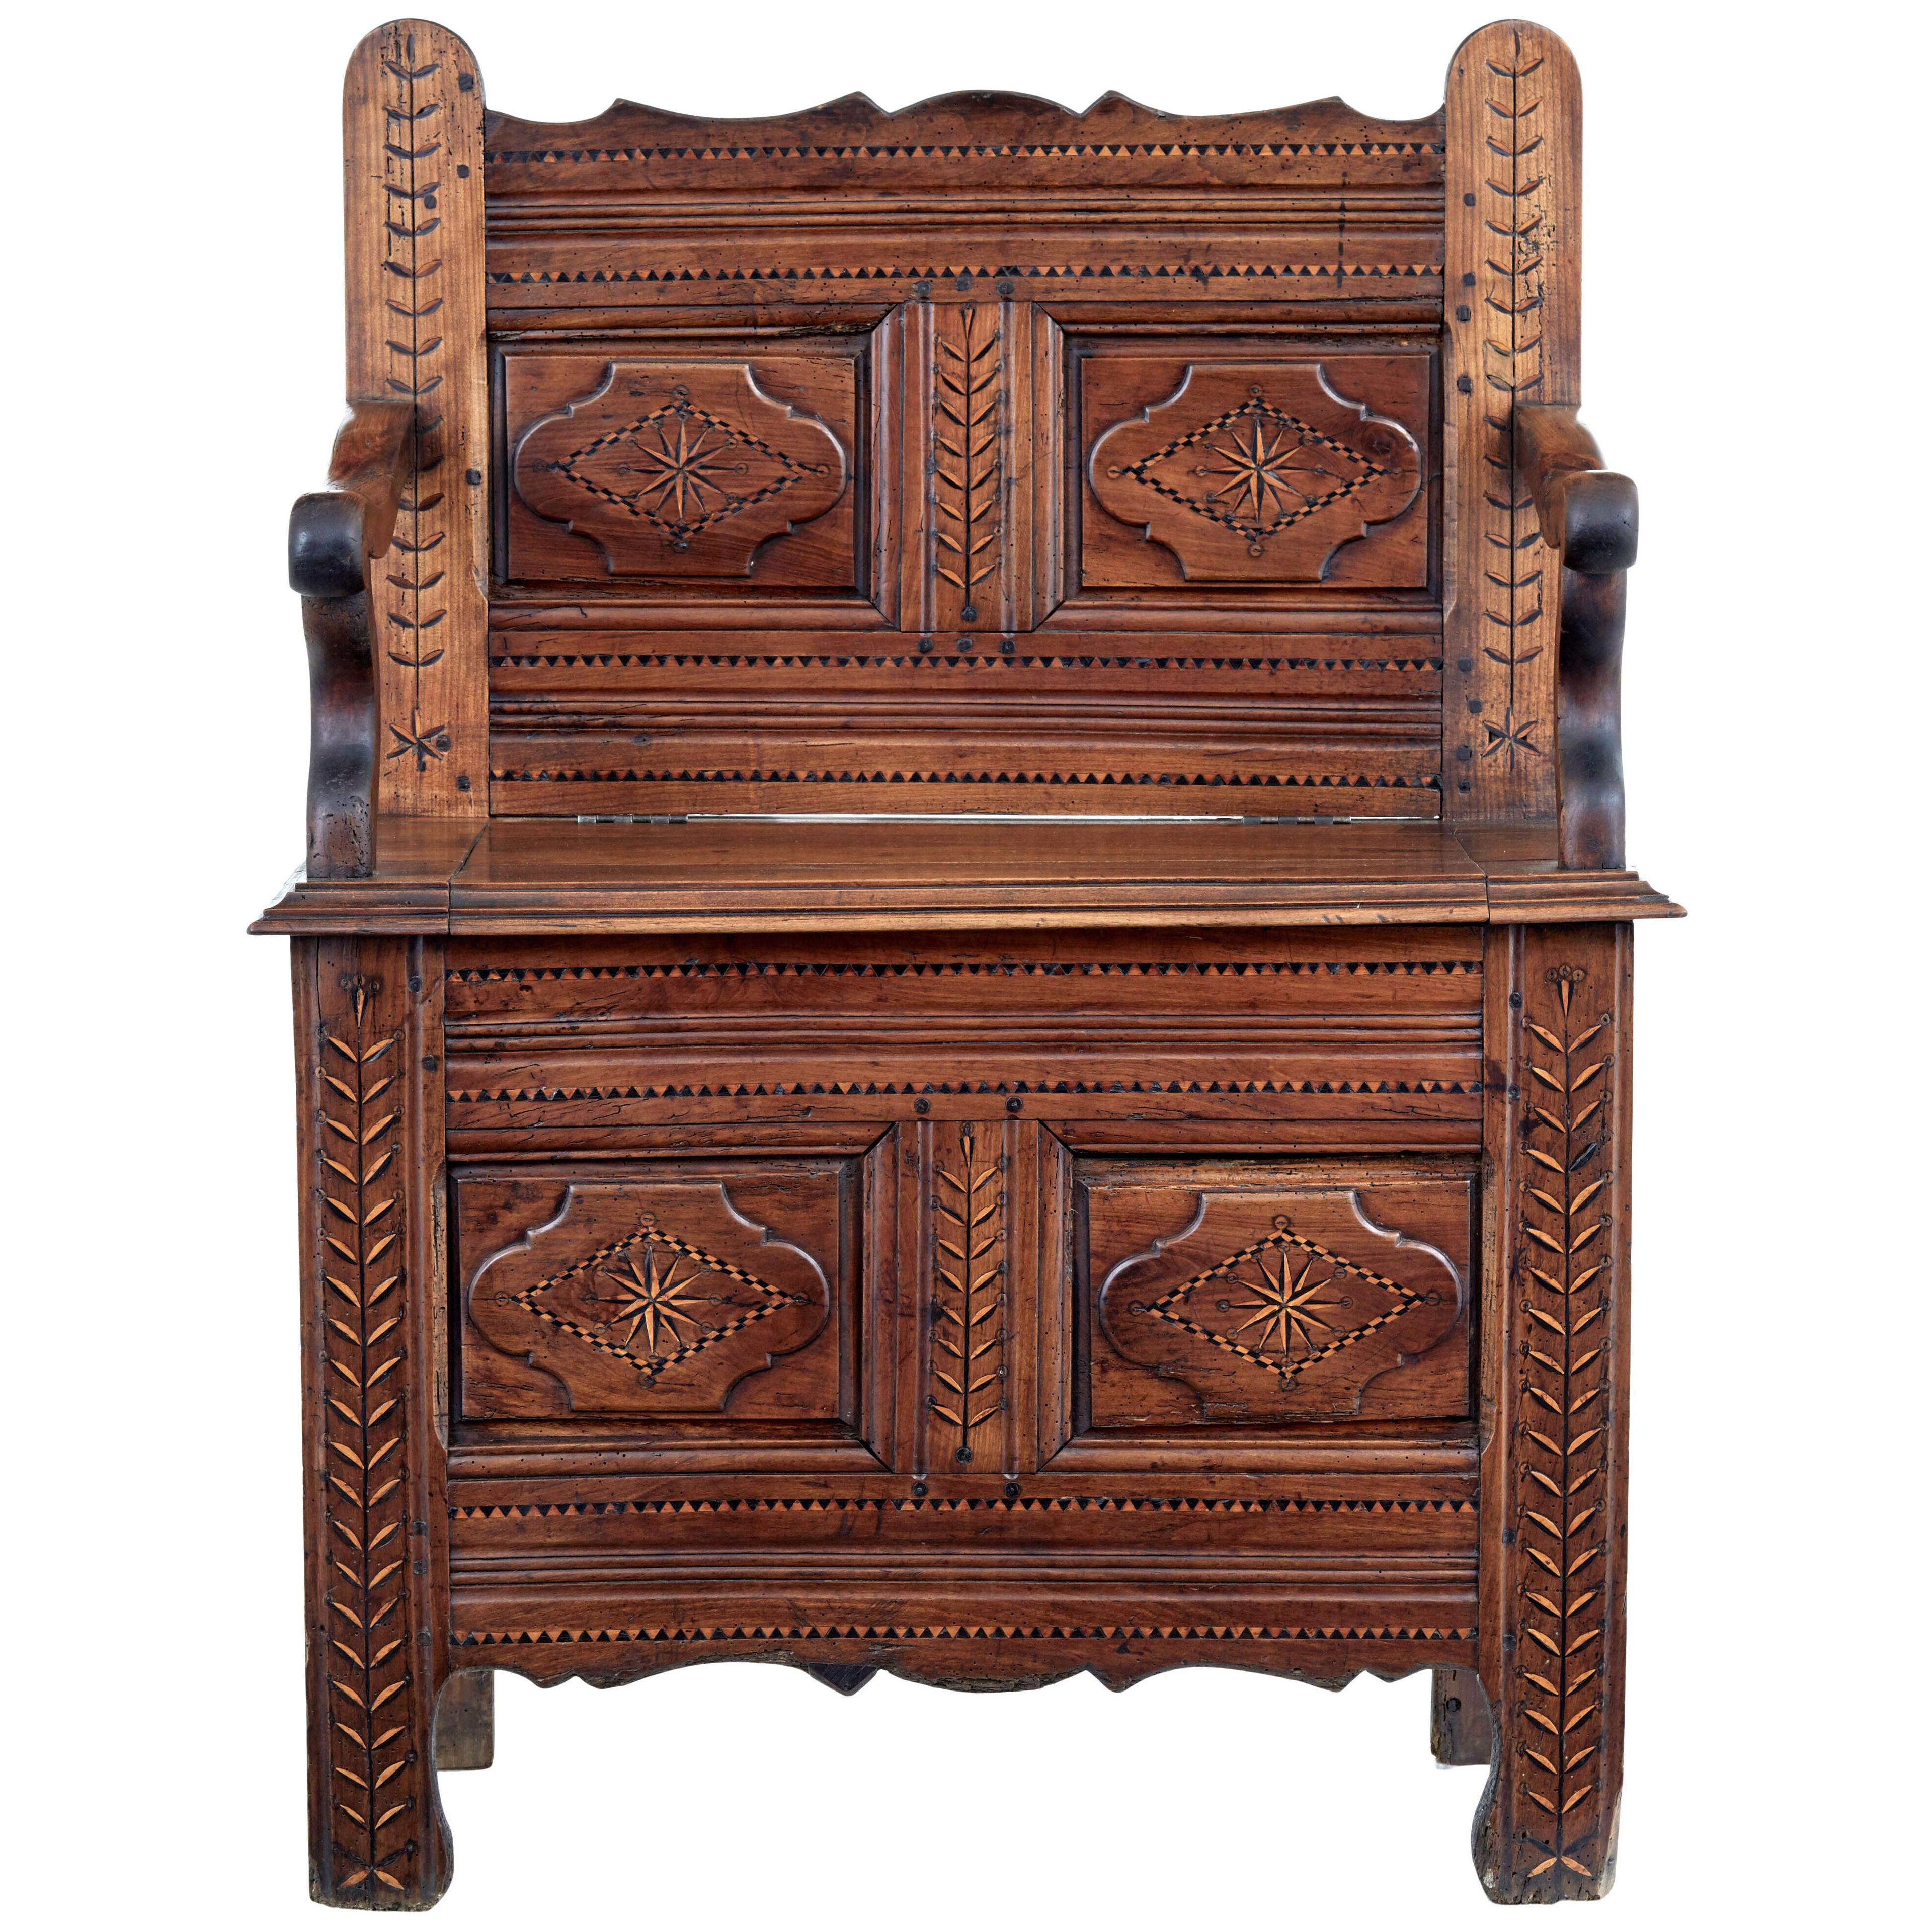 FRENCH 18TH CENTURY SMALL INLAID CHESTNUT SETTLE